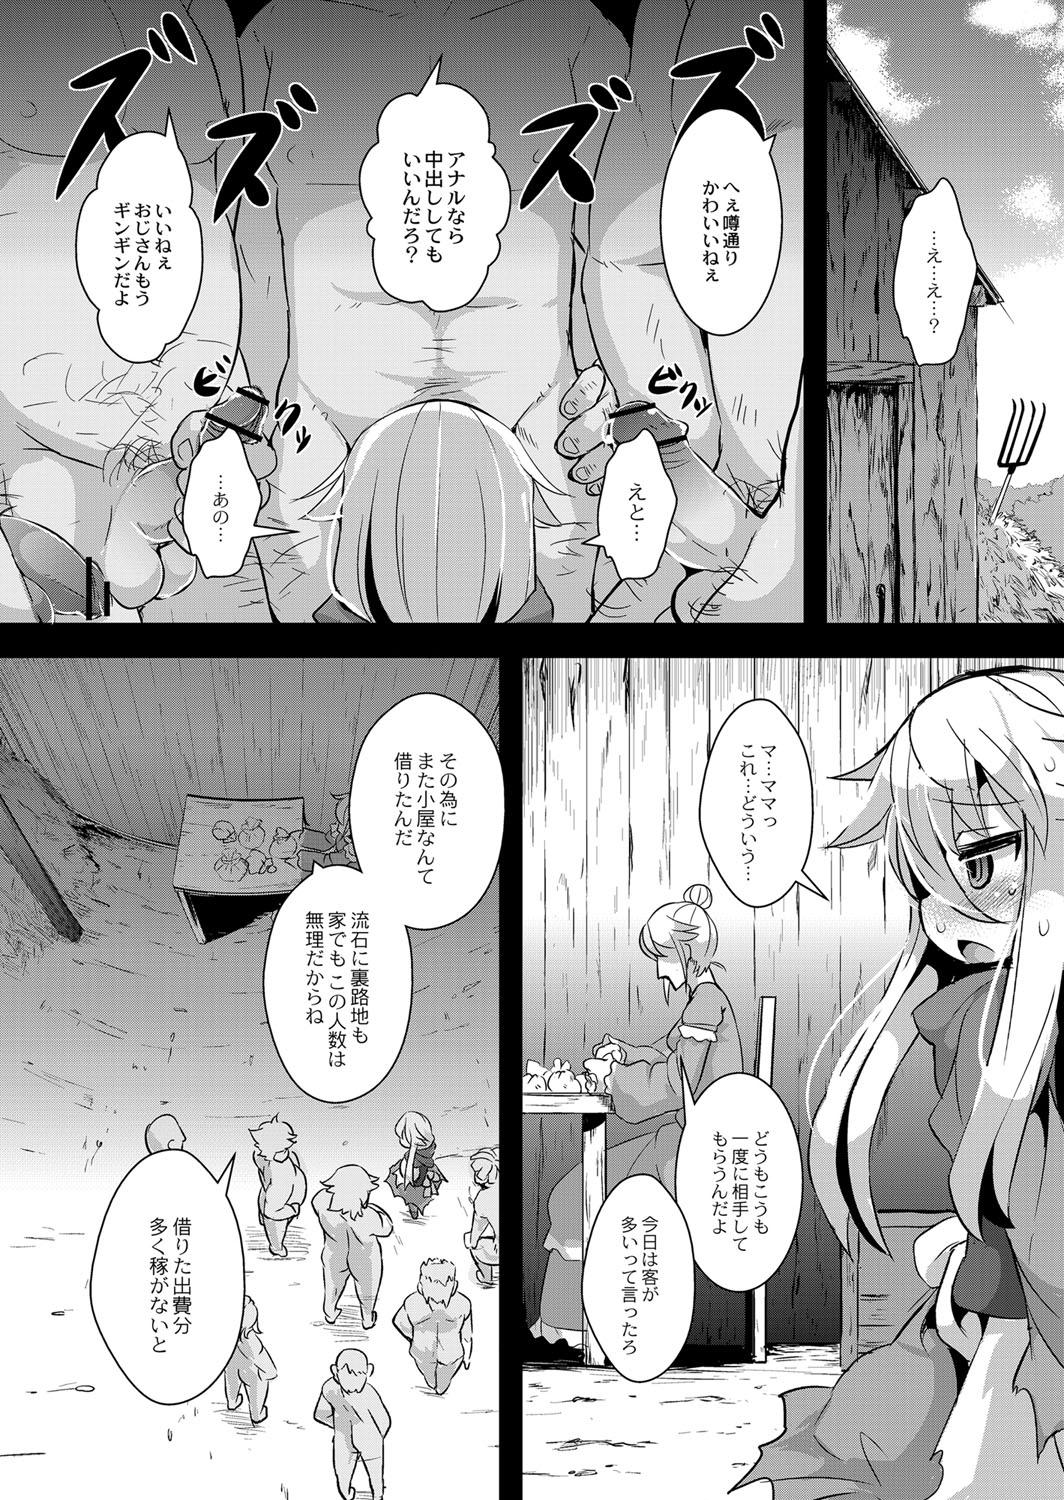 Naturaltits Ookami to Akazukin Ch. 3 - Little red riding hood Village - Page 10